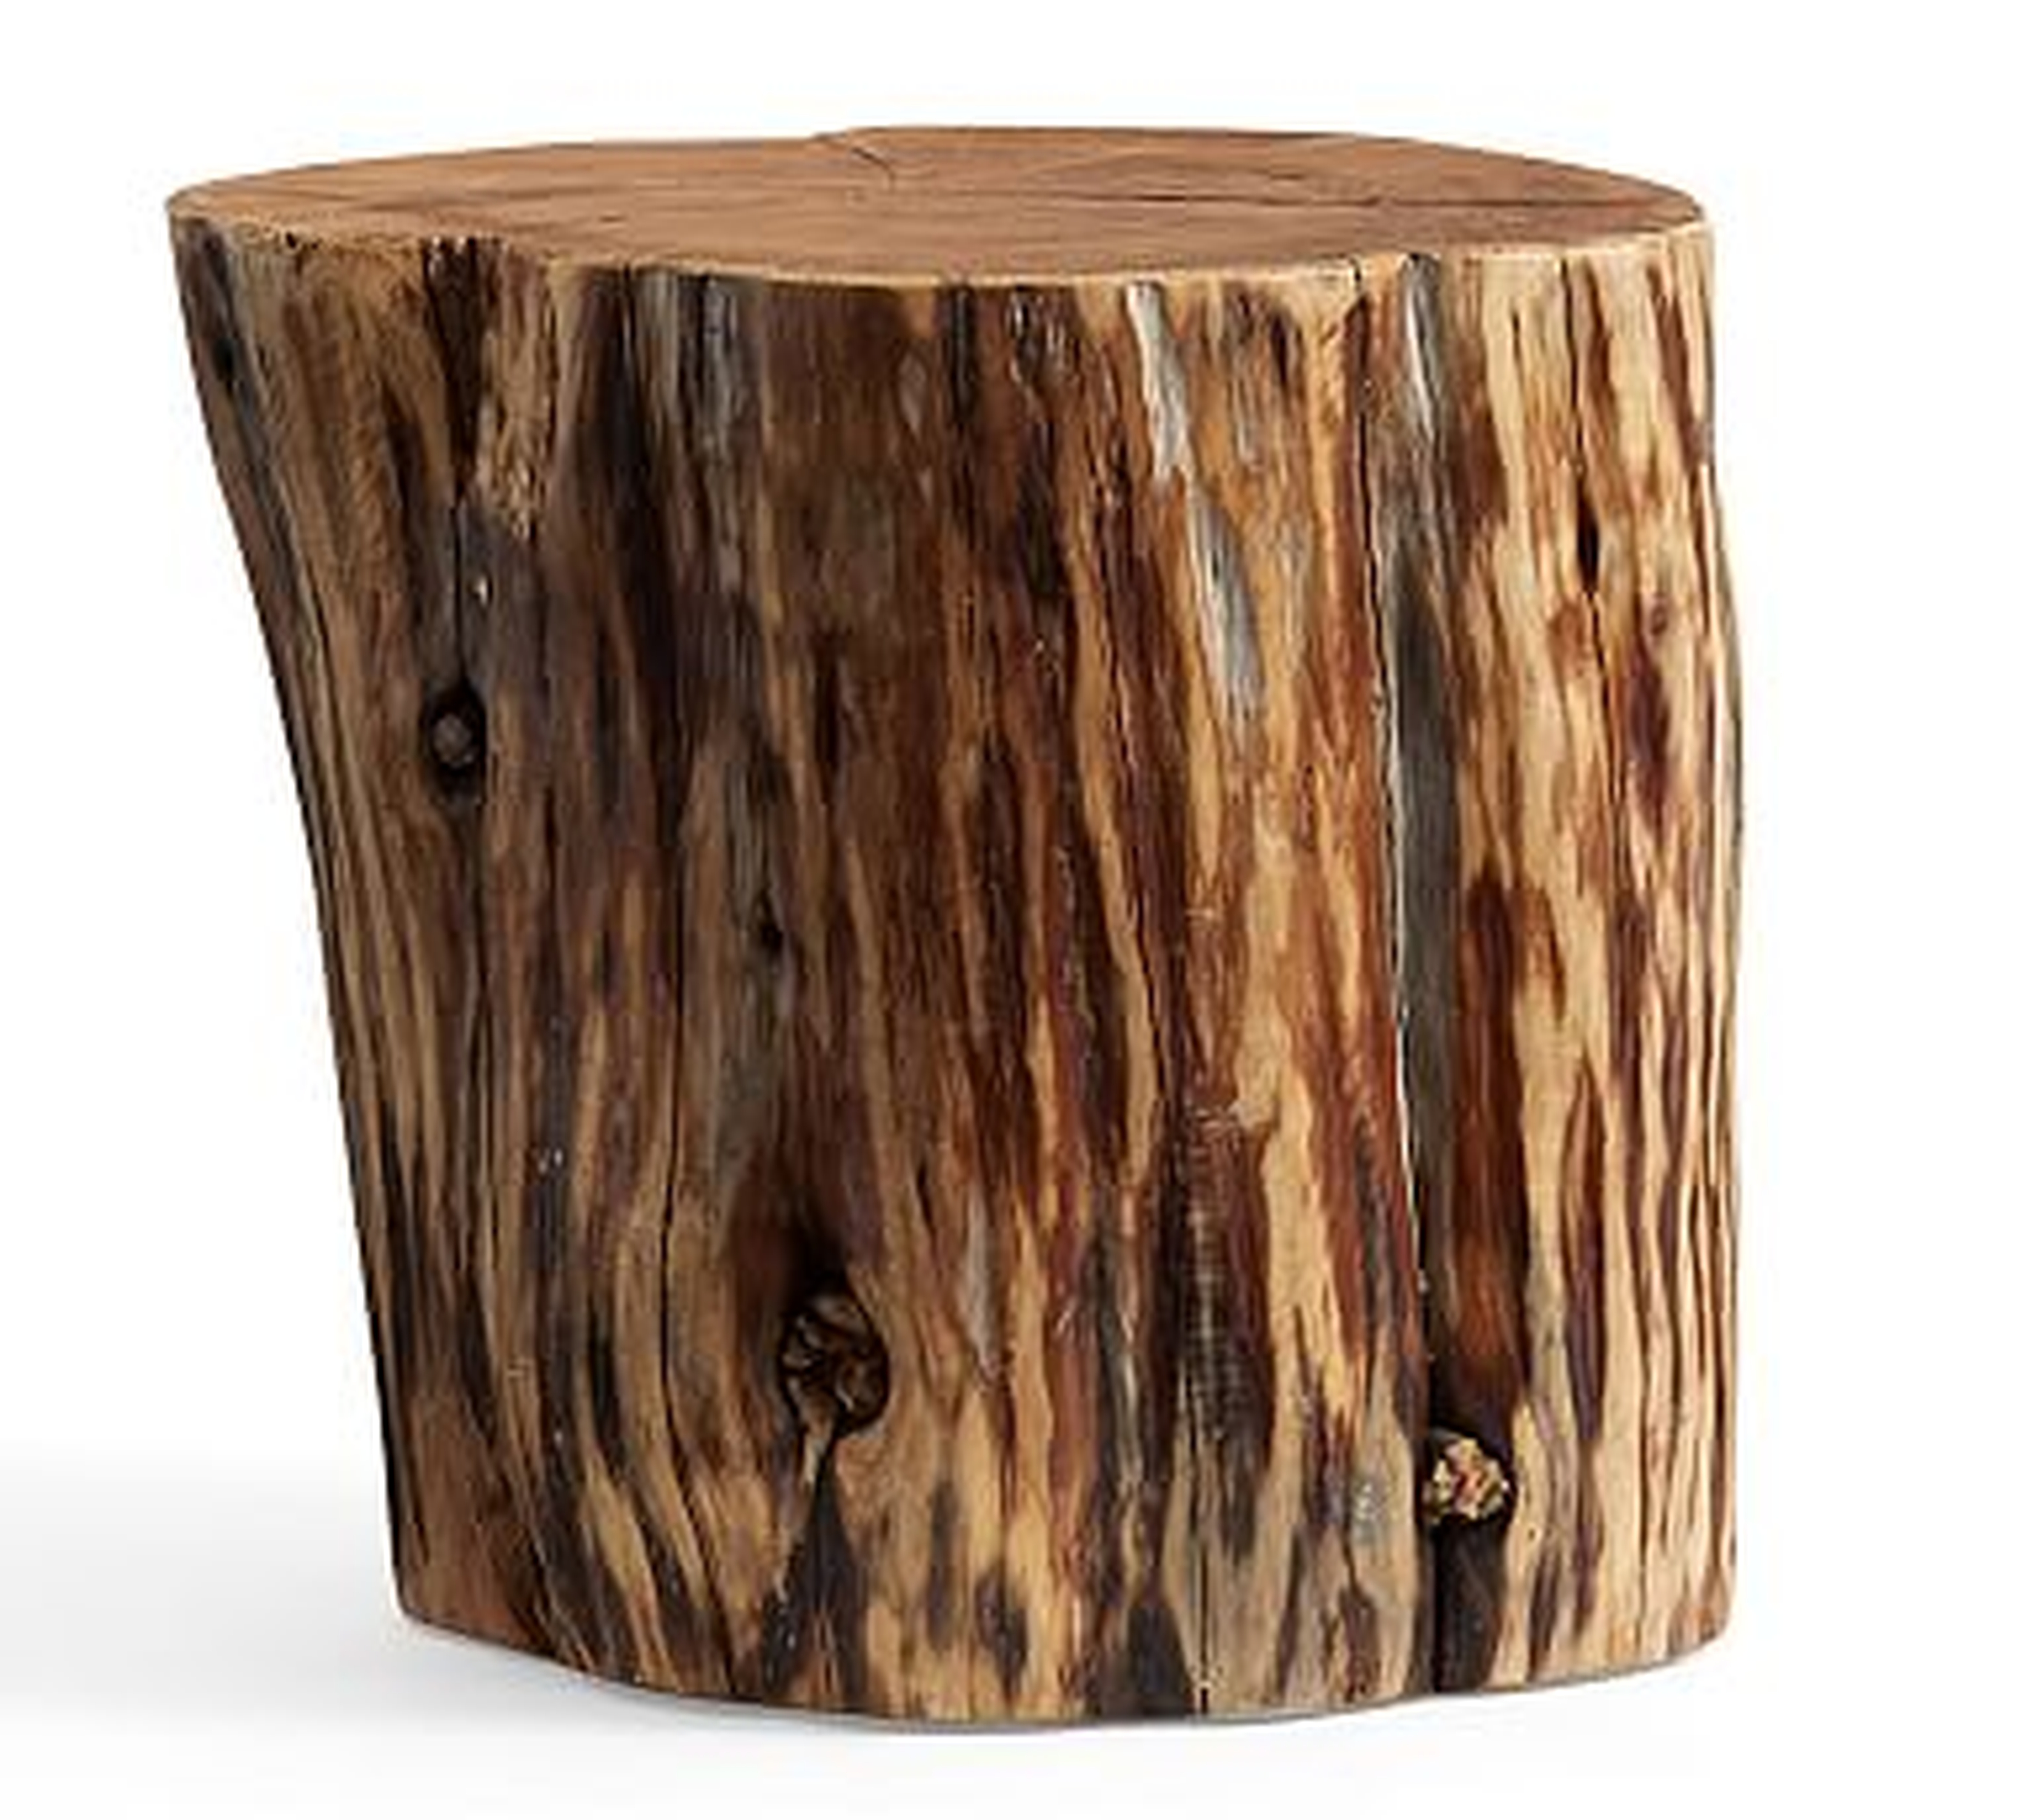 Reclaimed Wood Stump Table, Large - Pottery Barn